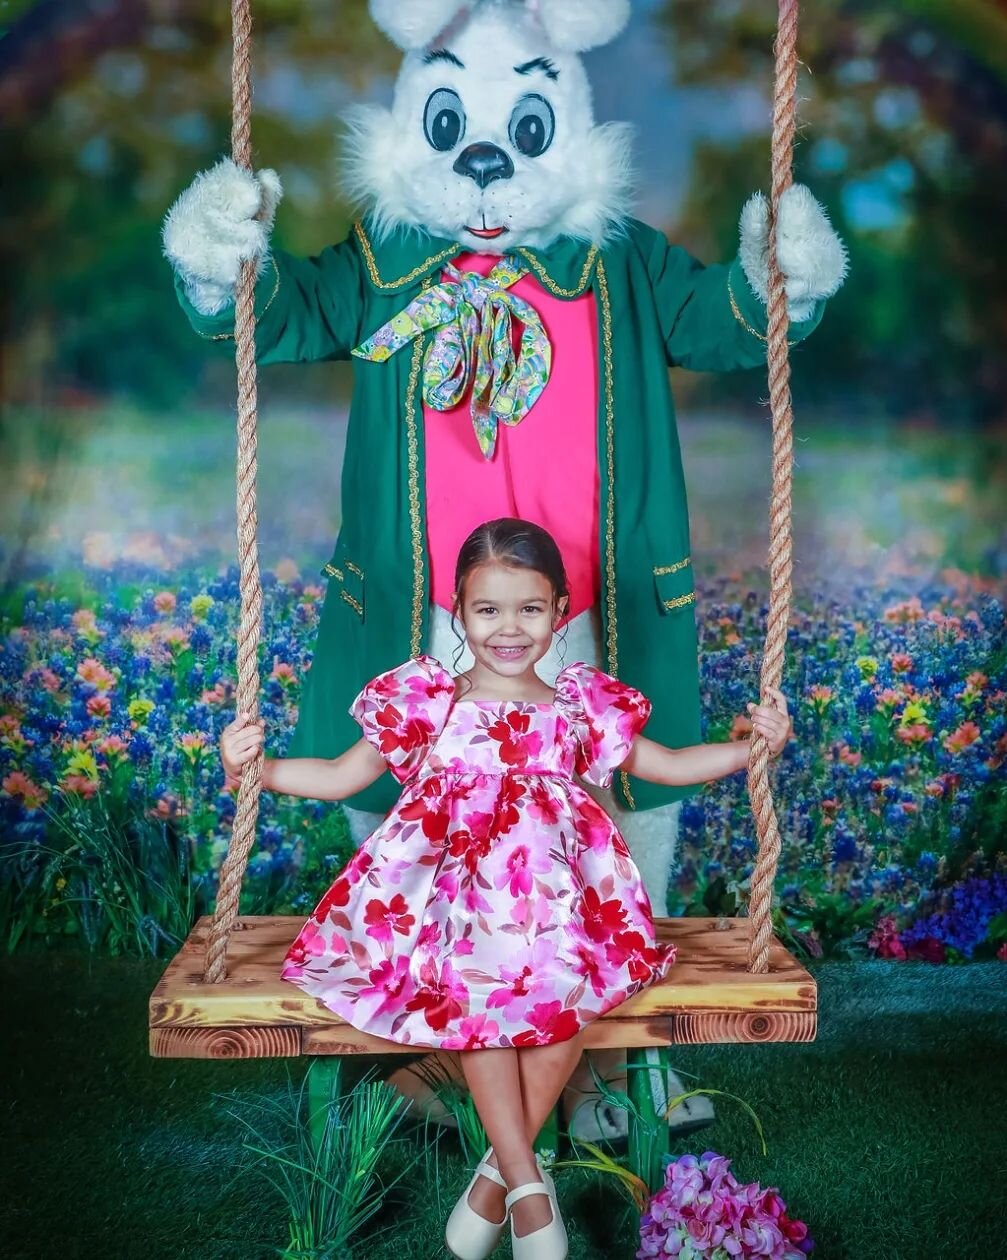 The bunny is READY!!! Book your Easter photo appointment on our website today- time is limited as Easter is approaching soon. We had the absolute pleasure of hosting the best families this week and have been so EGGCITED to share our new 2024 scenes🐰